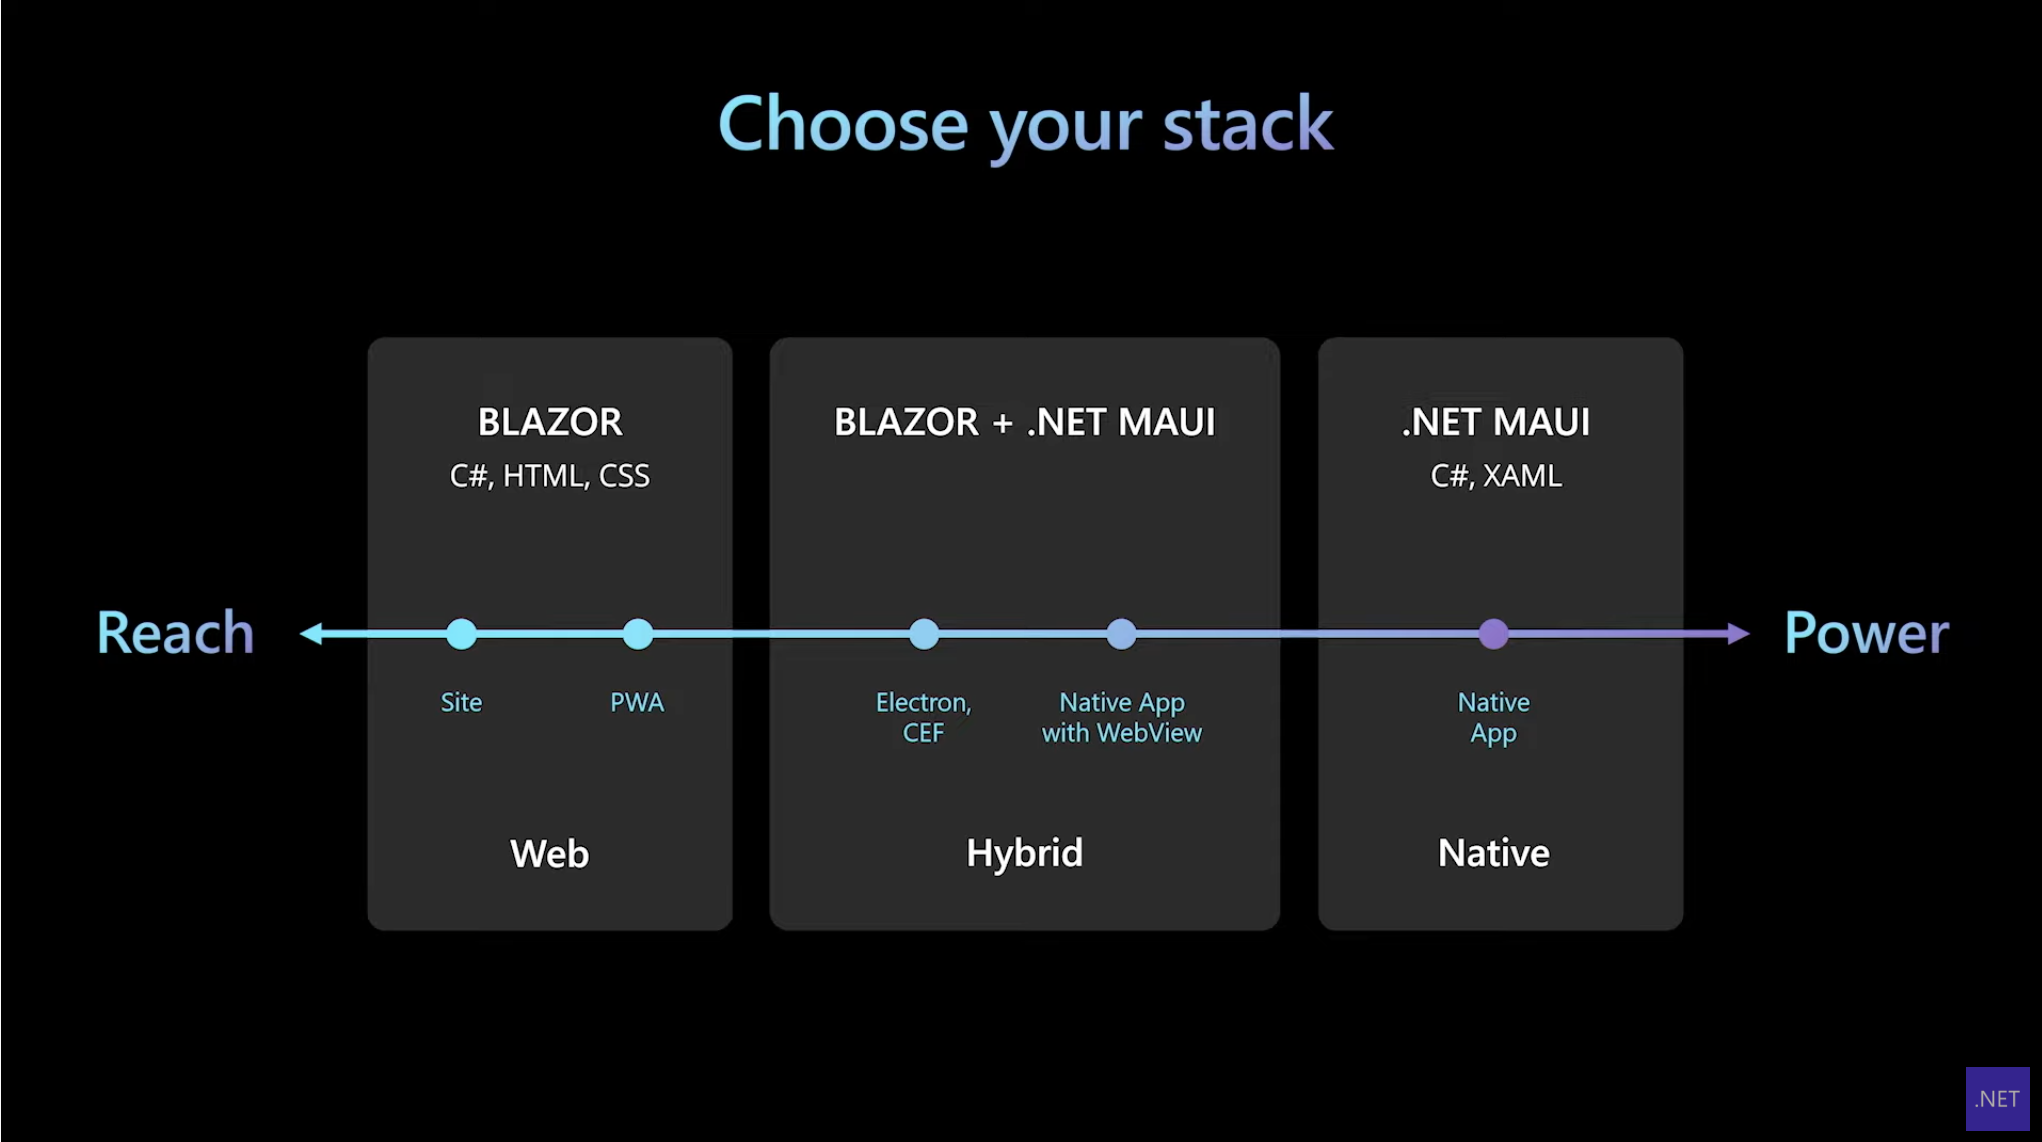 Choose your stack spectrum with reach at one end and power at the other. On the reach side is Blazor for web. Power side is .NET MAUI for native. In between is Blazor + .NET MAUI for hybrid.